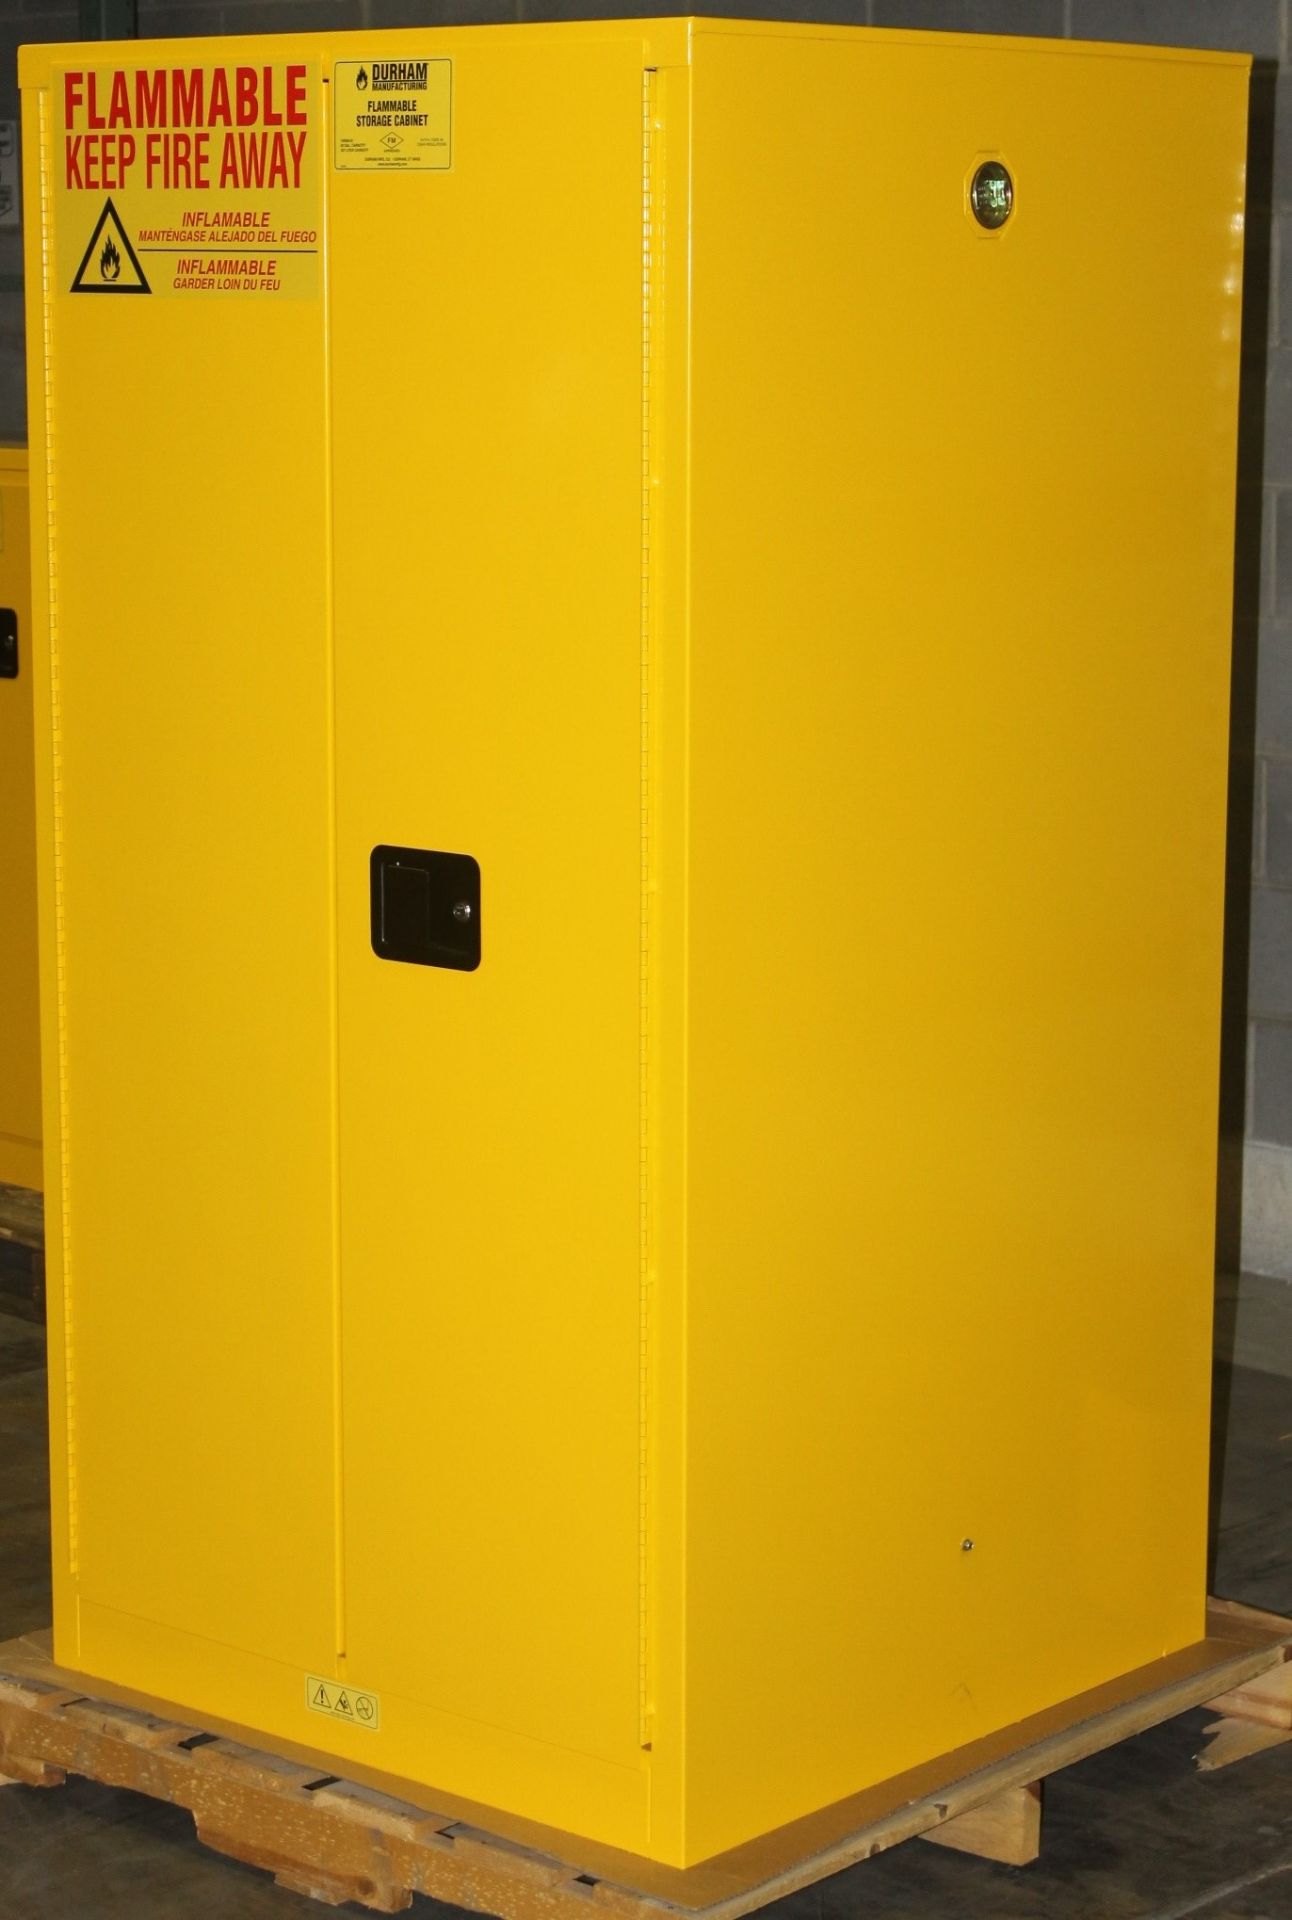 60 GALLONS FLAMMABLE SAFETY STORAGE CABINET, NEW